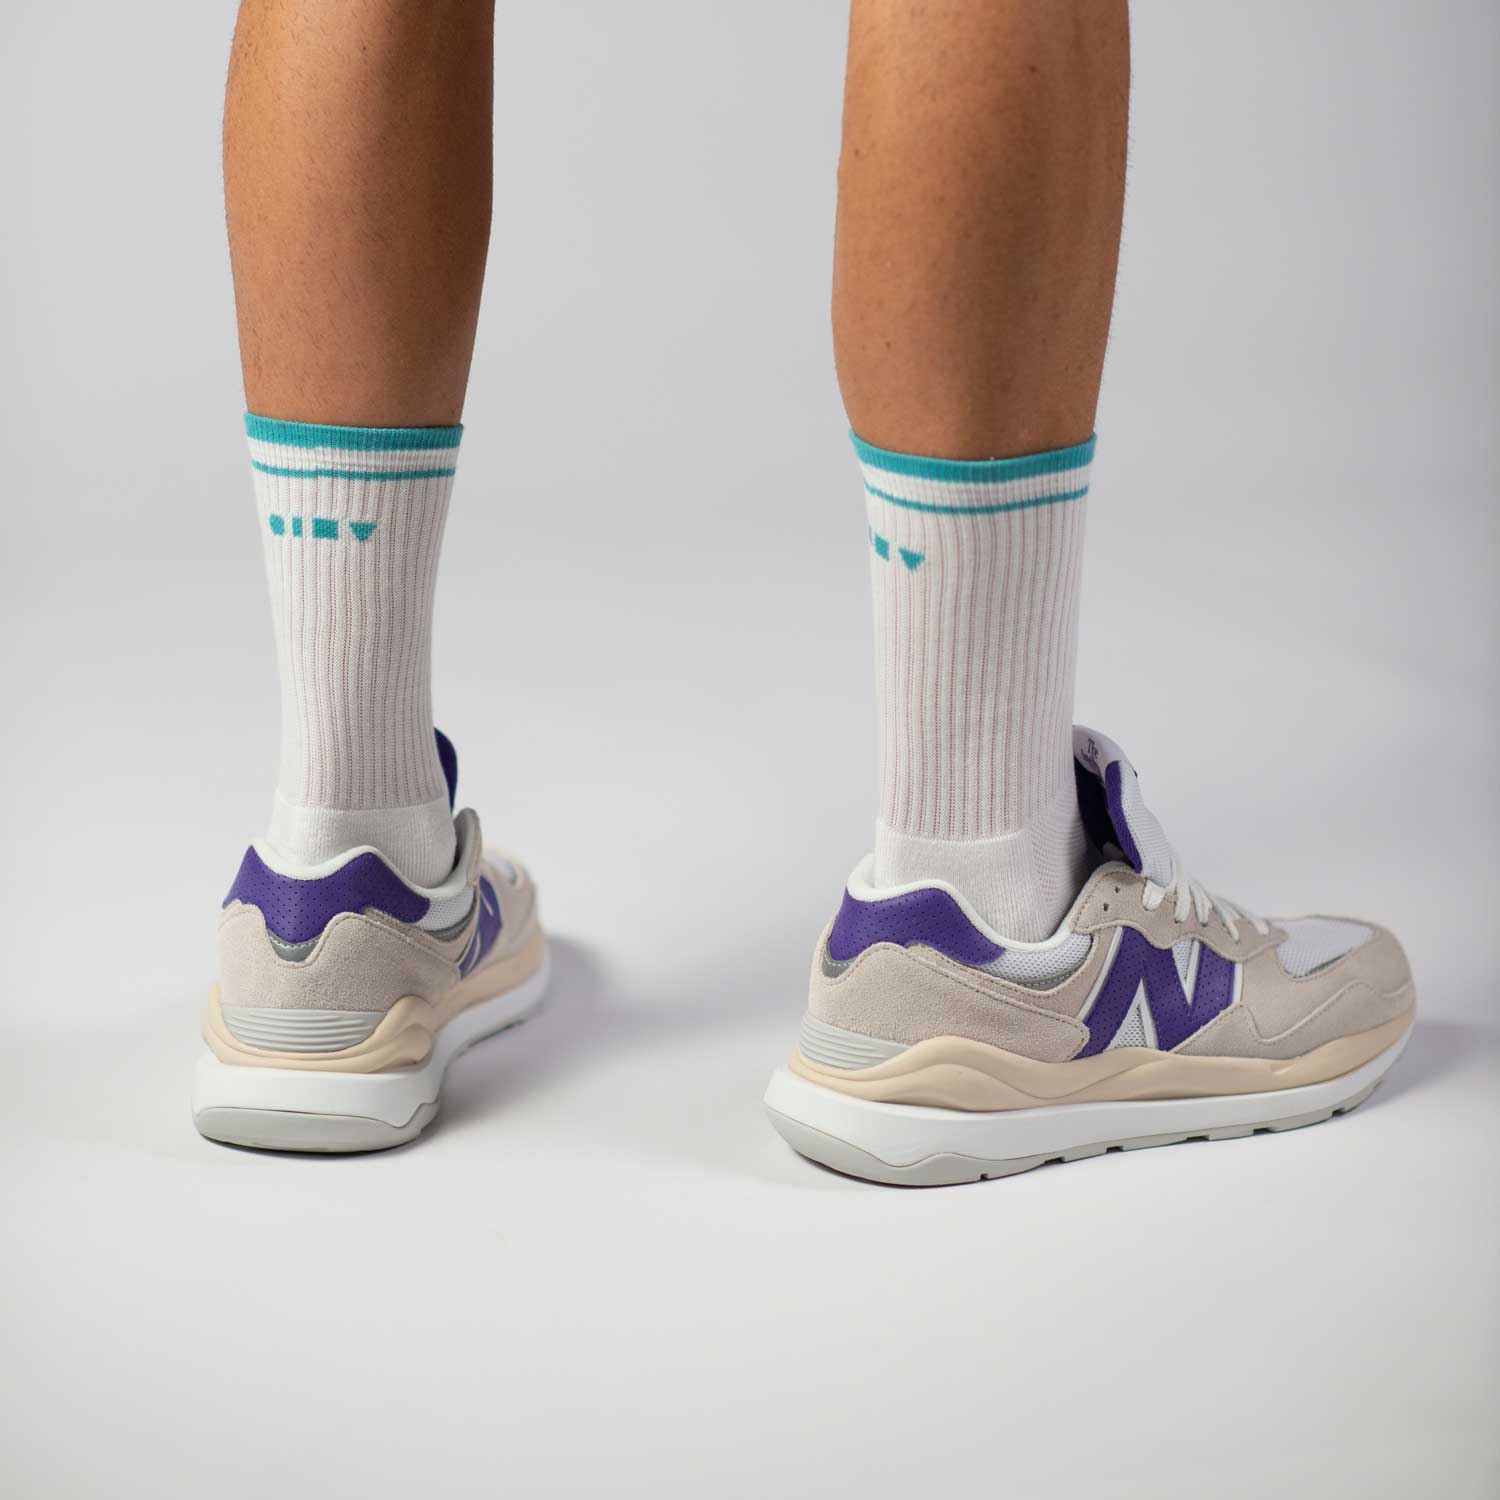 Clay Active's white and green men's tennis socks in studio with New Balance shoes.